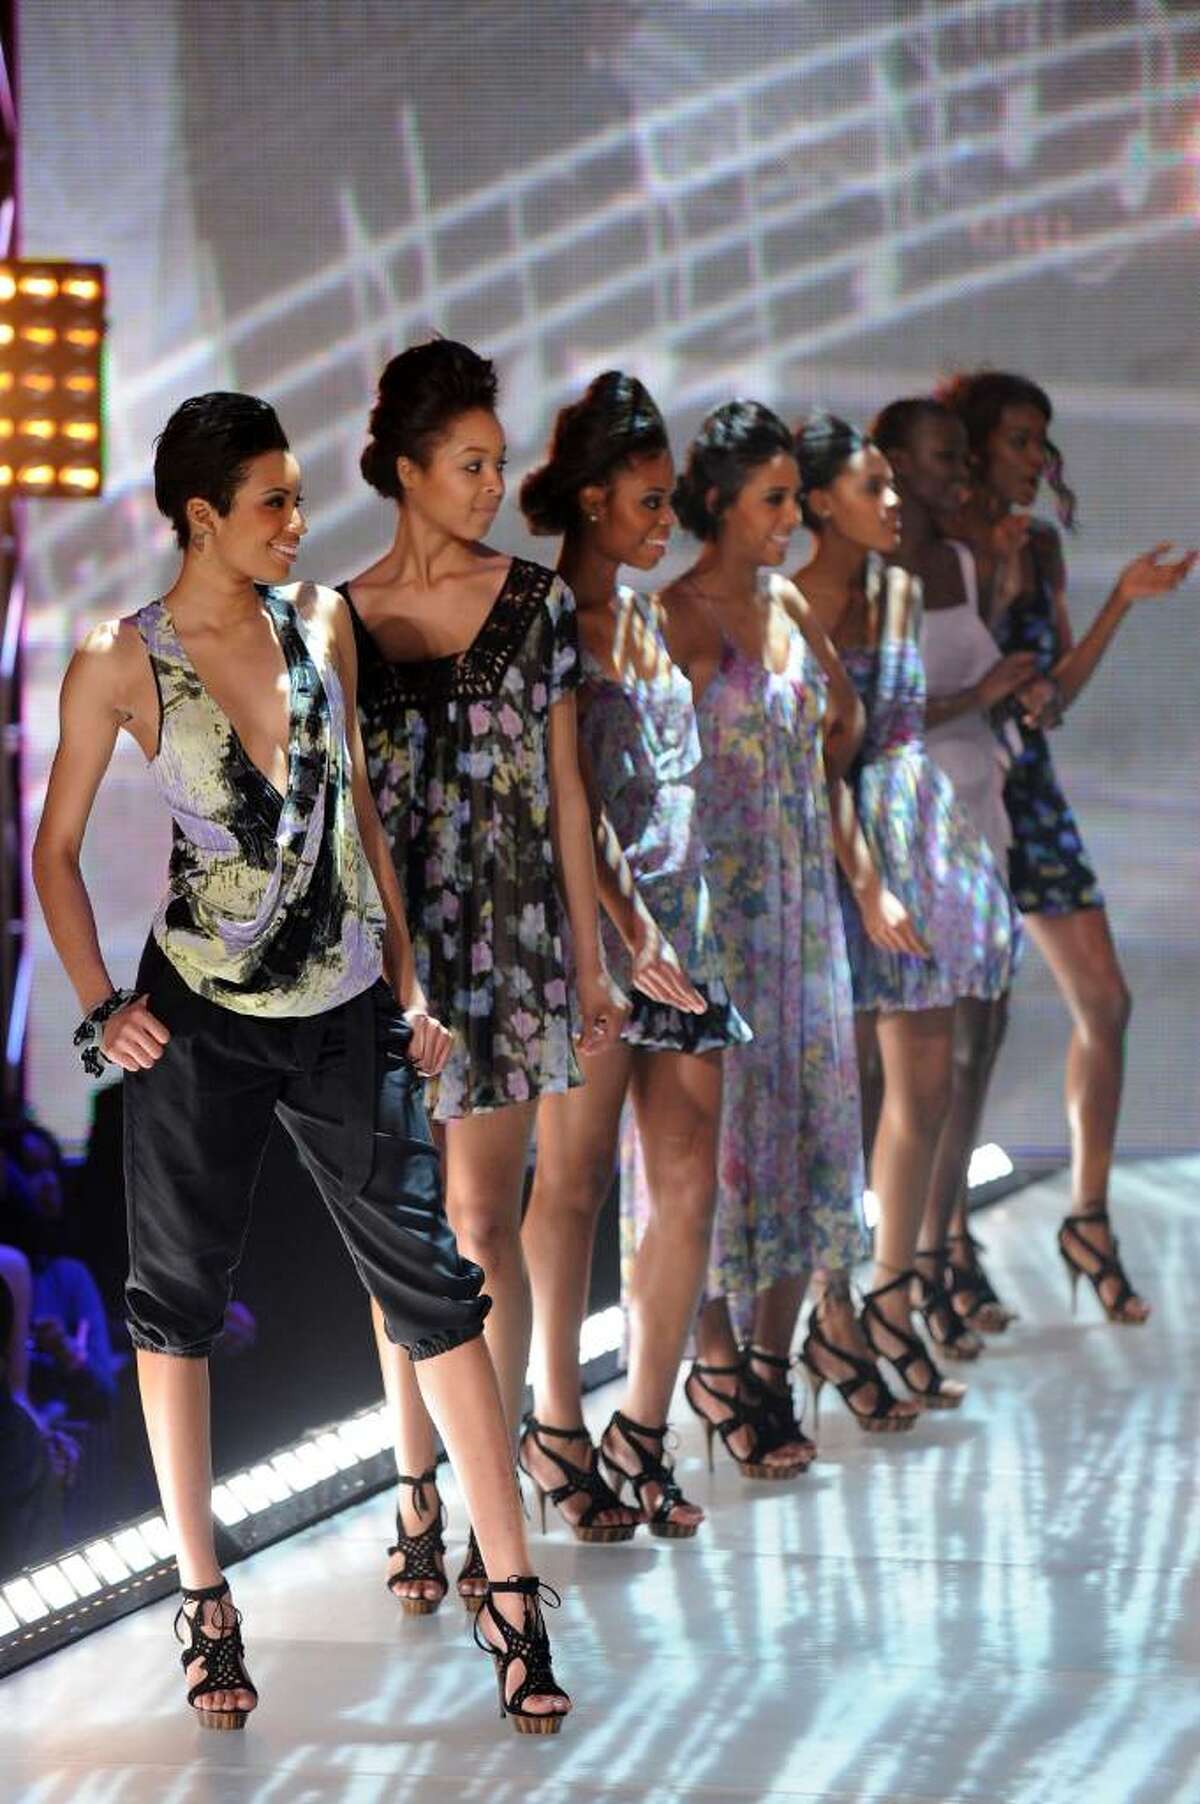 NEW YORK - FEBRUARY 27: Models walk the runway at BET's Rip The Runway 2010 at the Hammerstein Ballroom on February 27, 2010 in New York City. (Photo by Bryan Bedder/Getty Images)